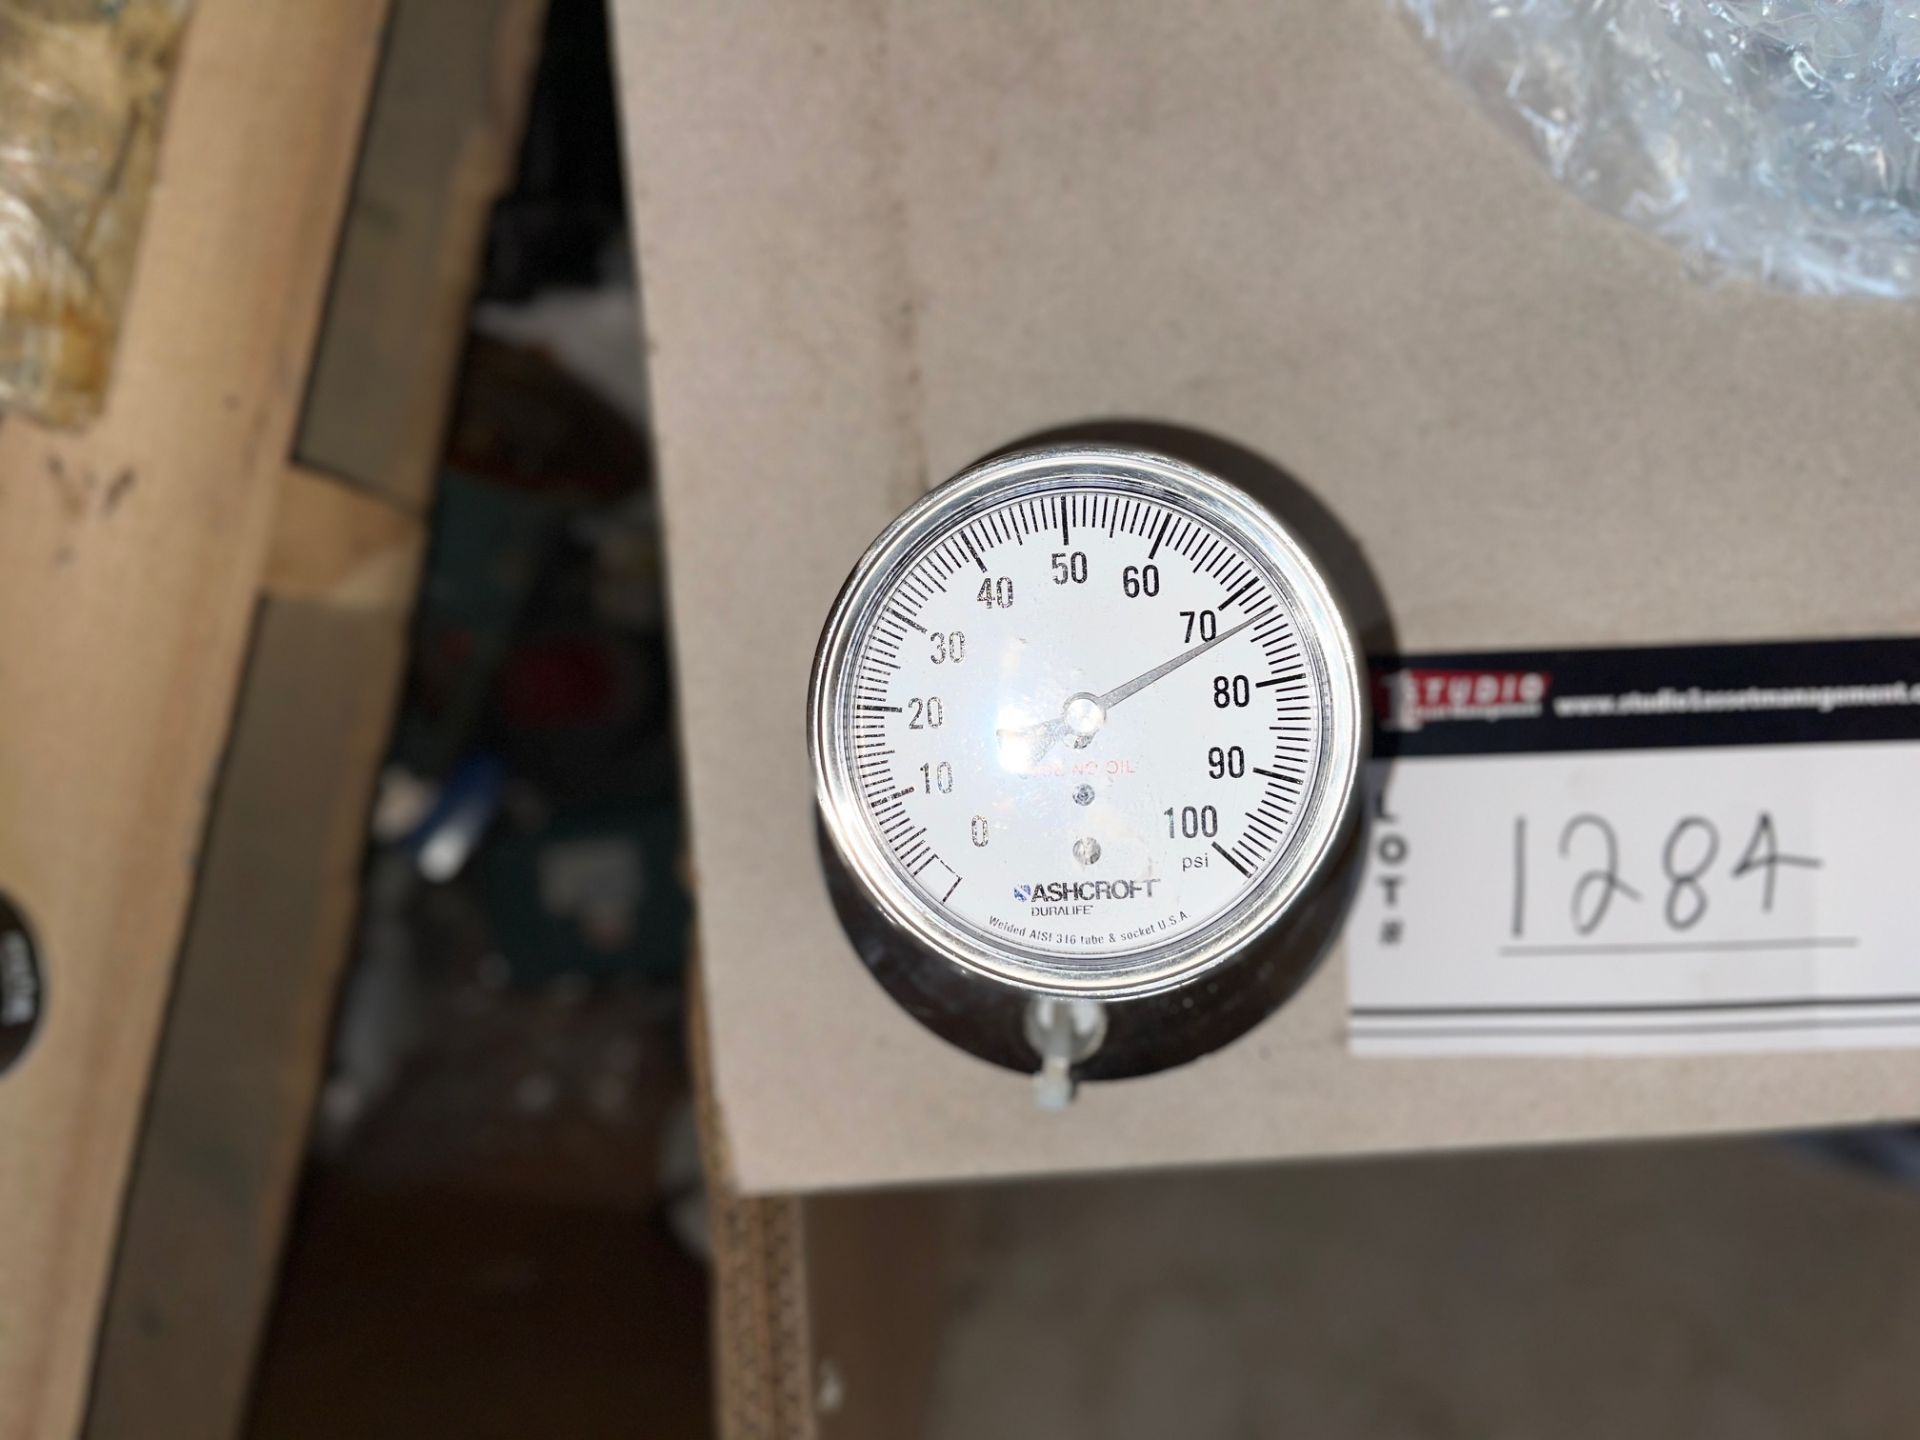 ASHCROFT PRE-PRESSURIZED METRE, 4 3/4 “ FLANGE WITH ISOLATION DISC, 4 VOLTS - Image 2 of 6